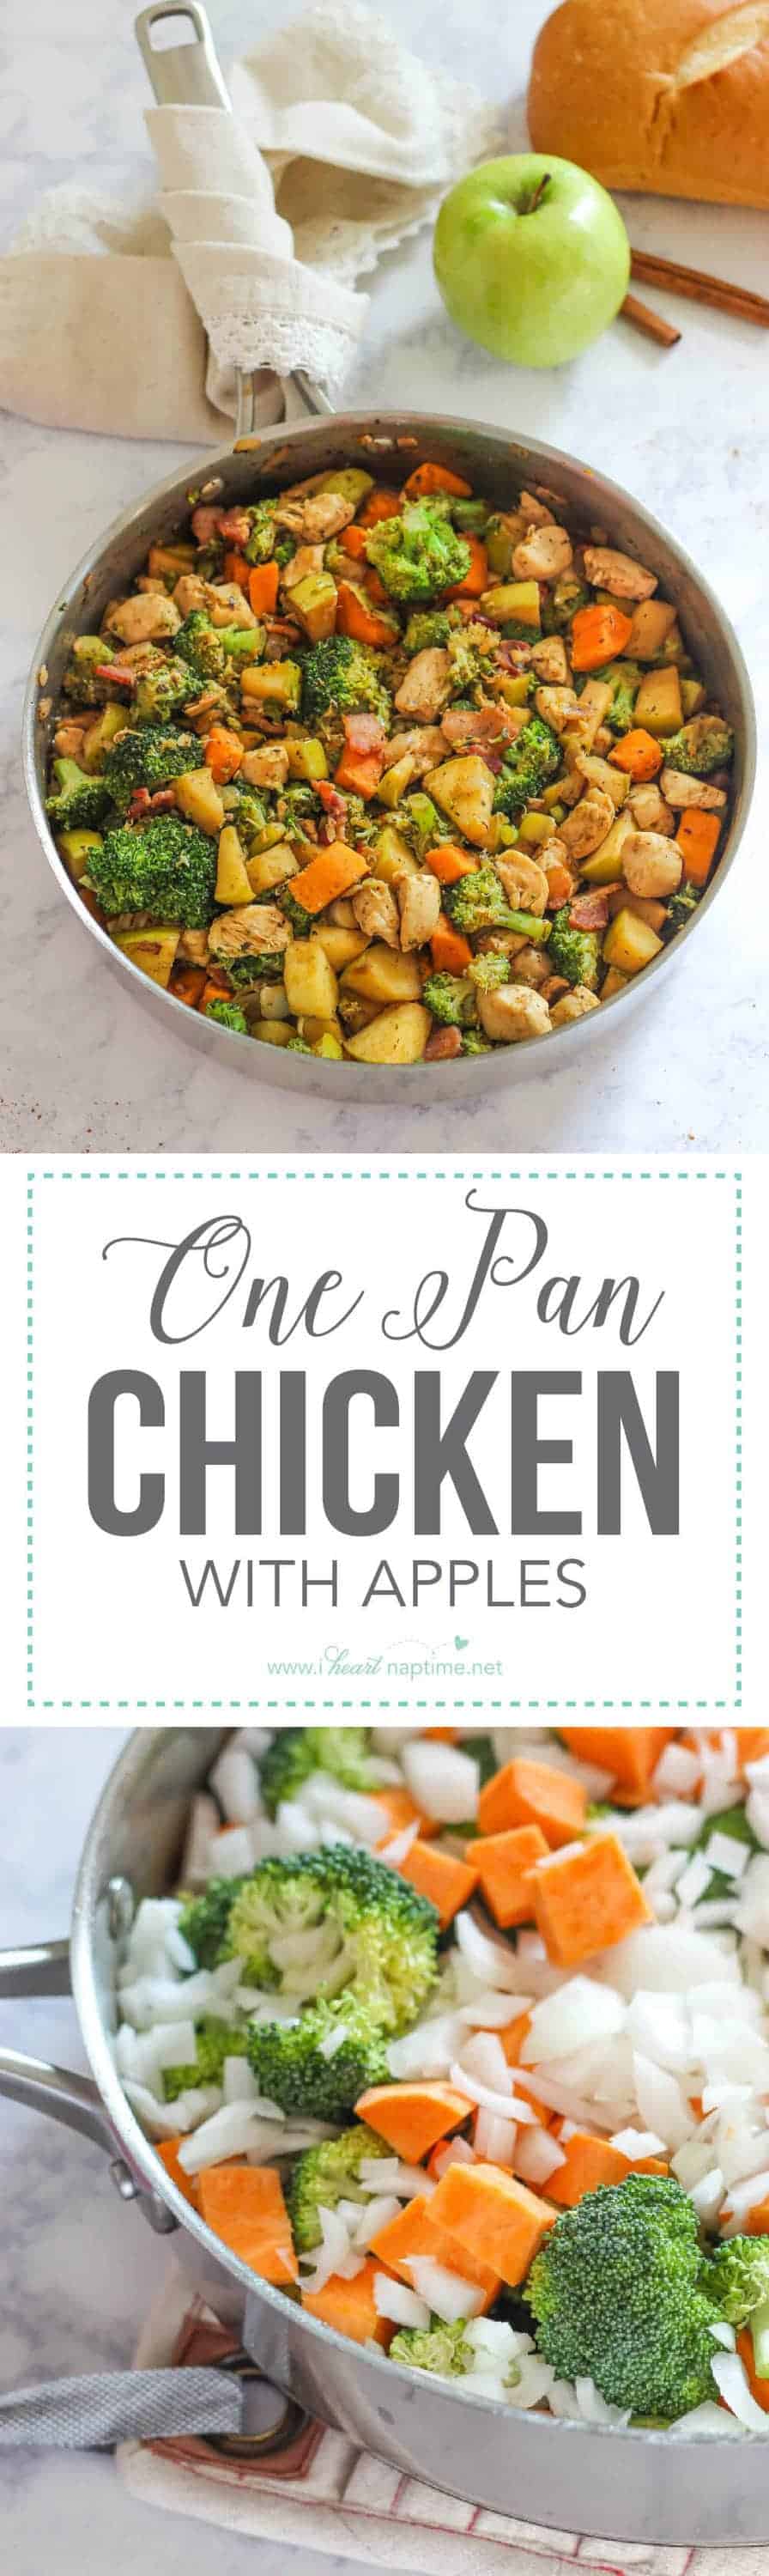 One Pan Chicken with Apples is an easy and rustic dinner option made with healthy vegetables and apples. This dish is the quintessential fall recipe!